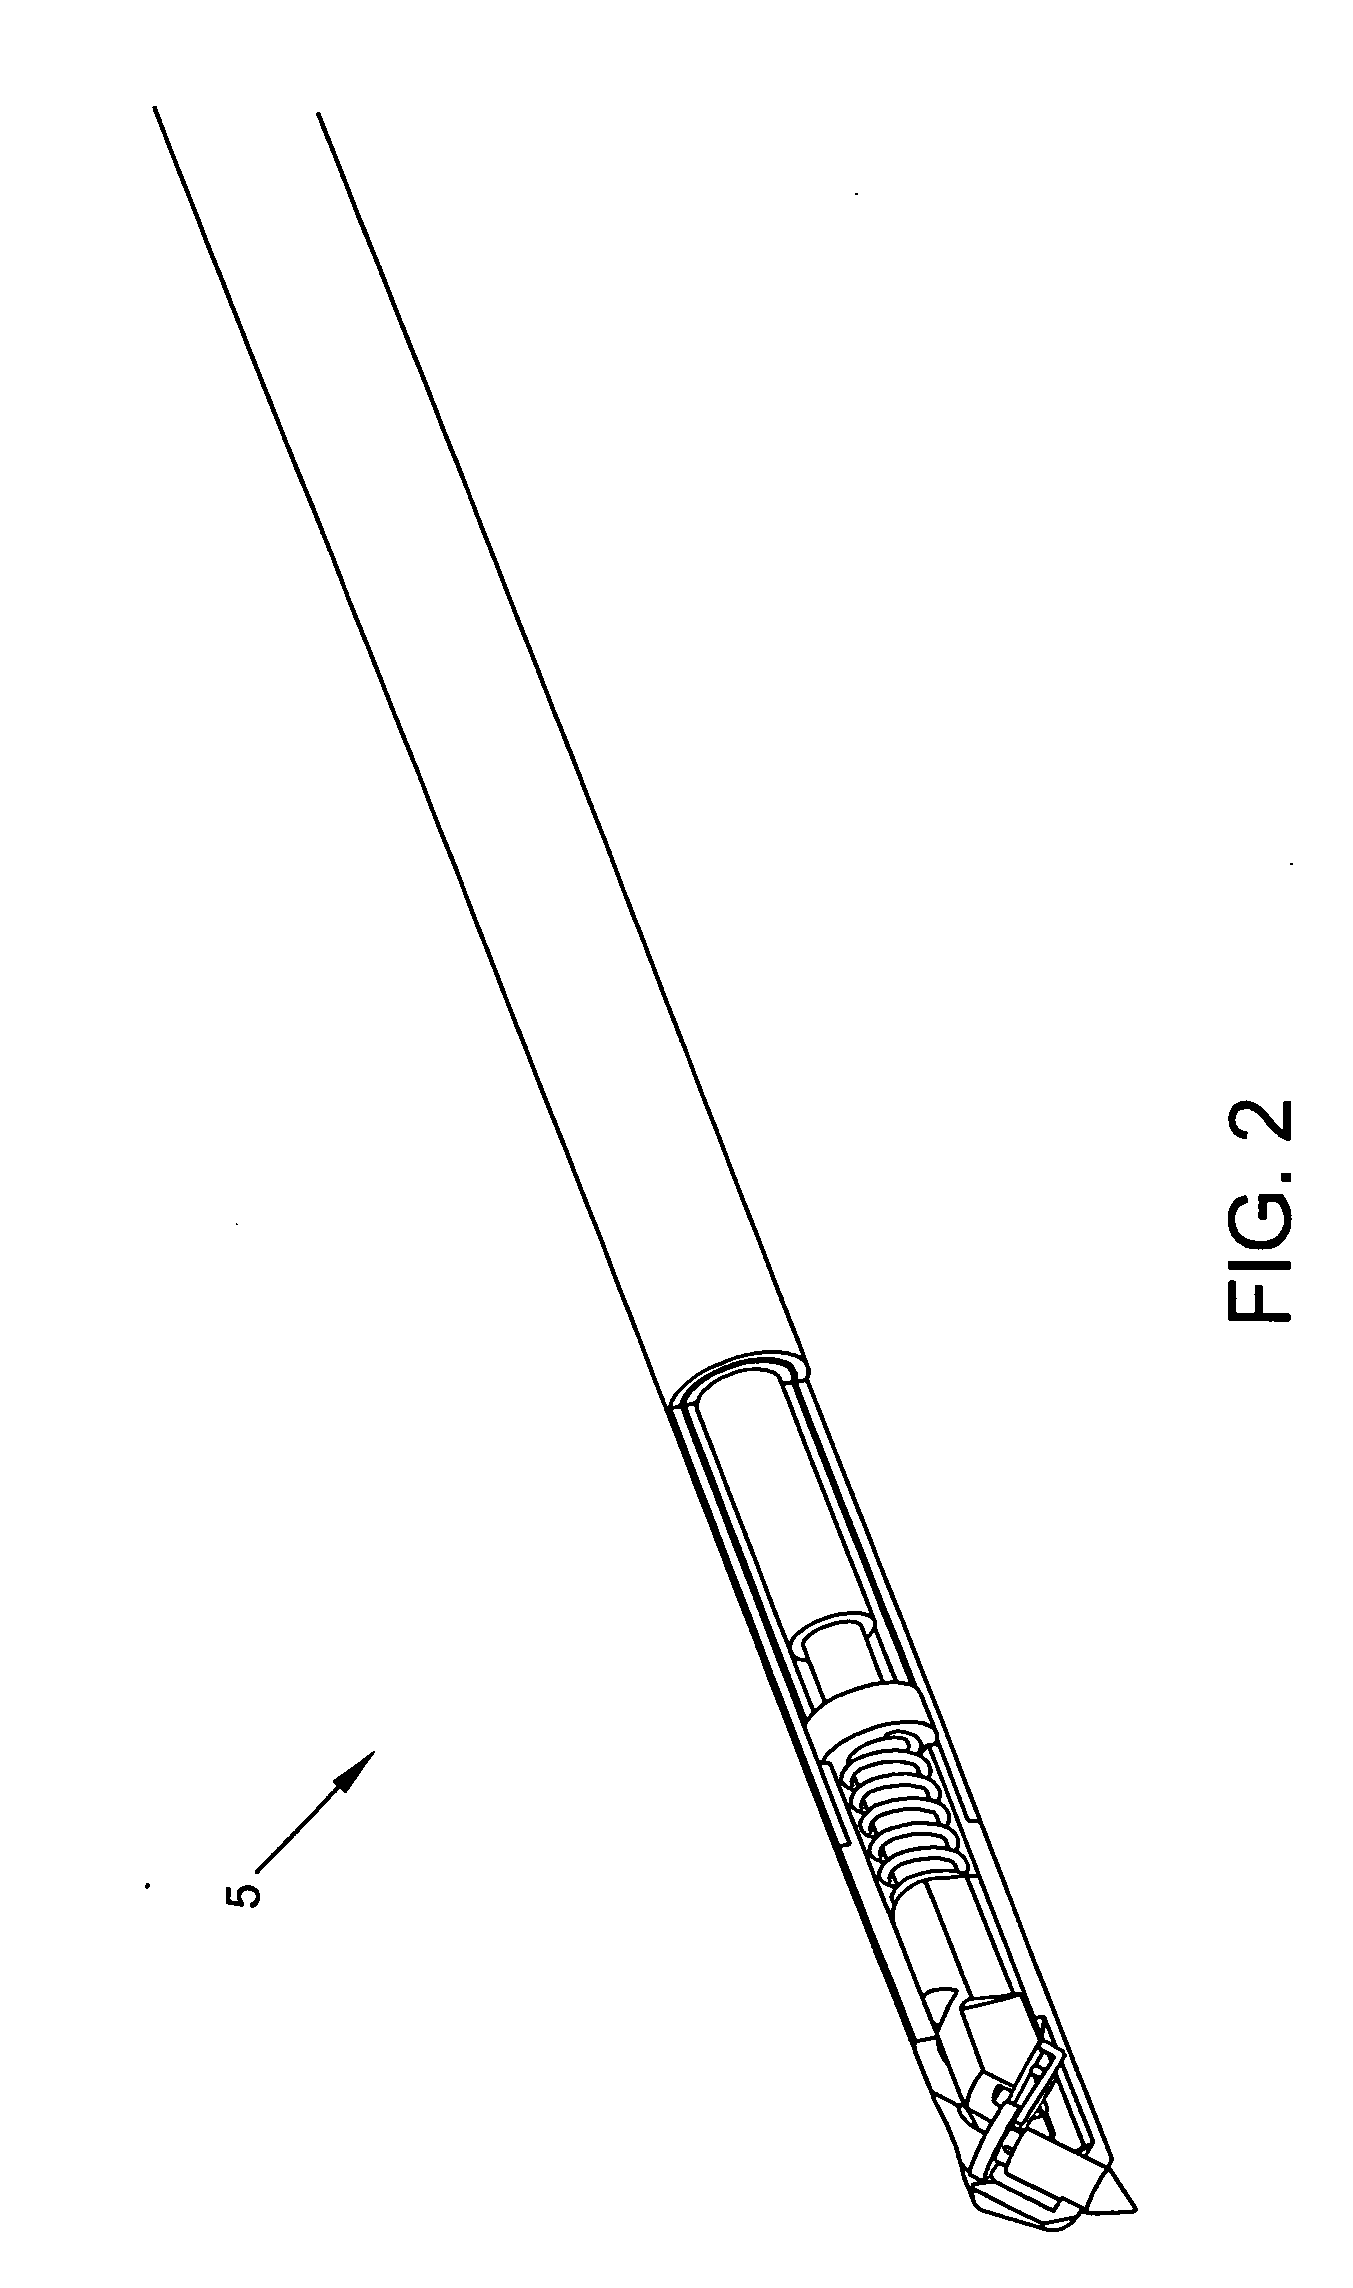 Method and apparatus for performing arthroscopic microfracture surgery